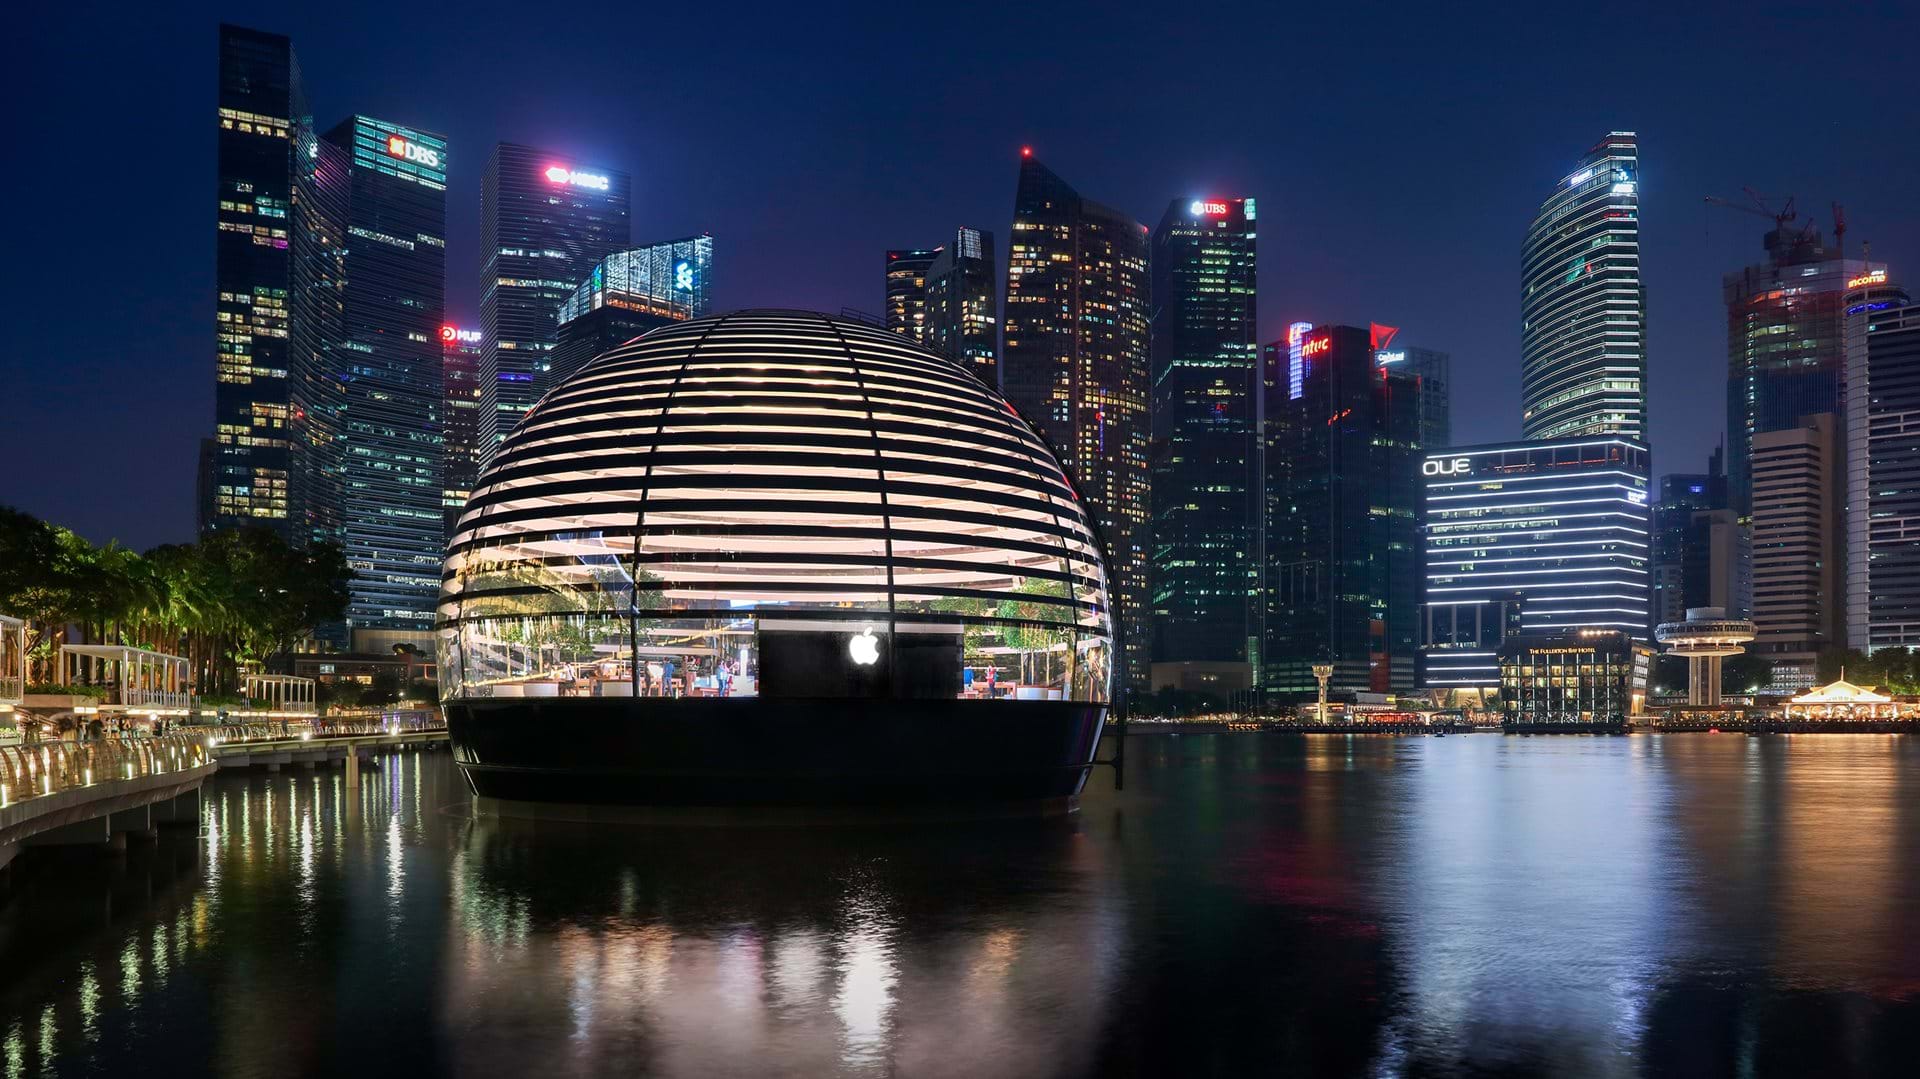 The Floating Sphere in Front of Marina Bay Sands Has Been Revealed